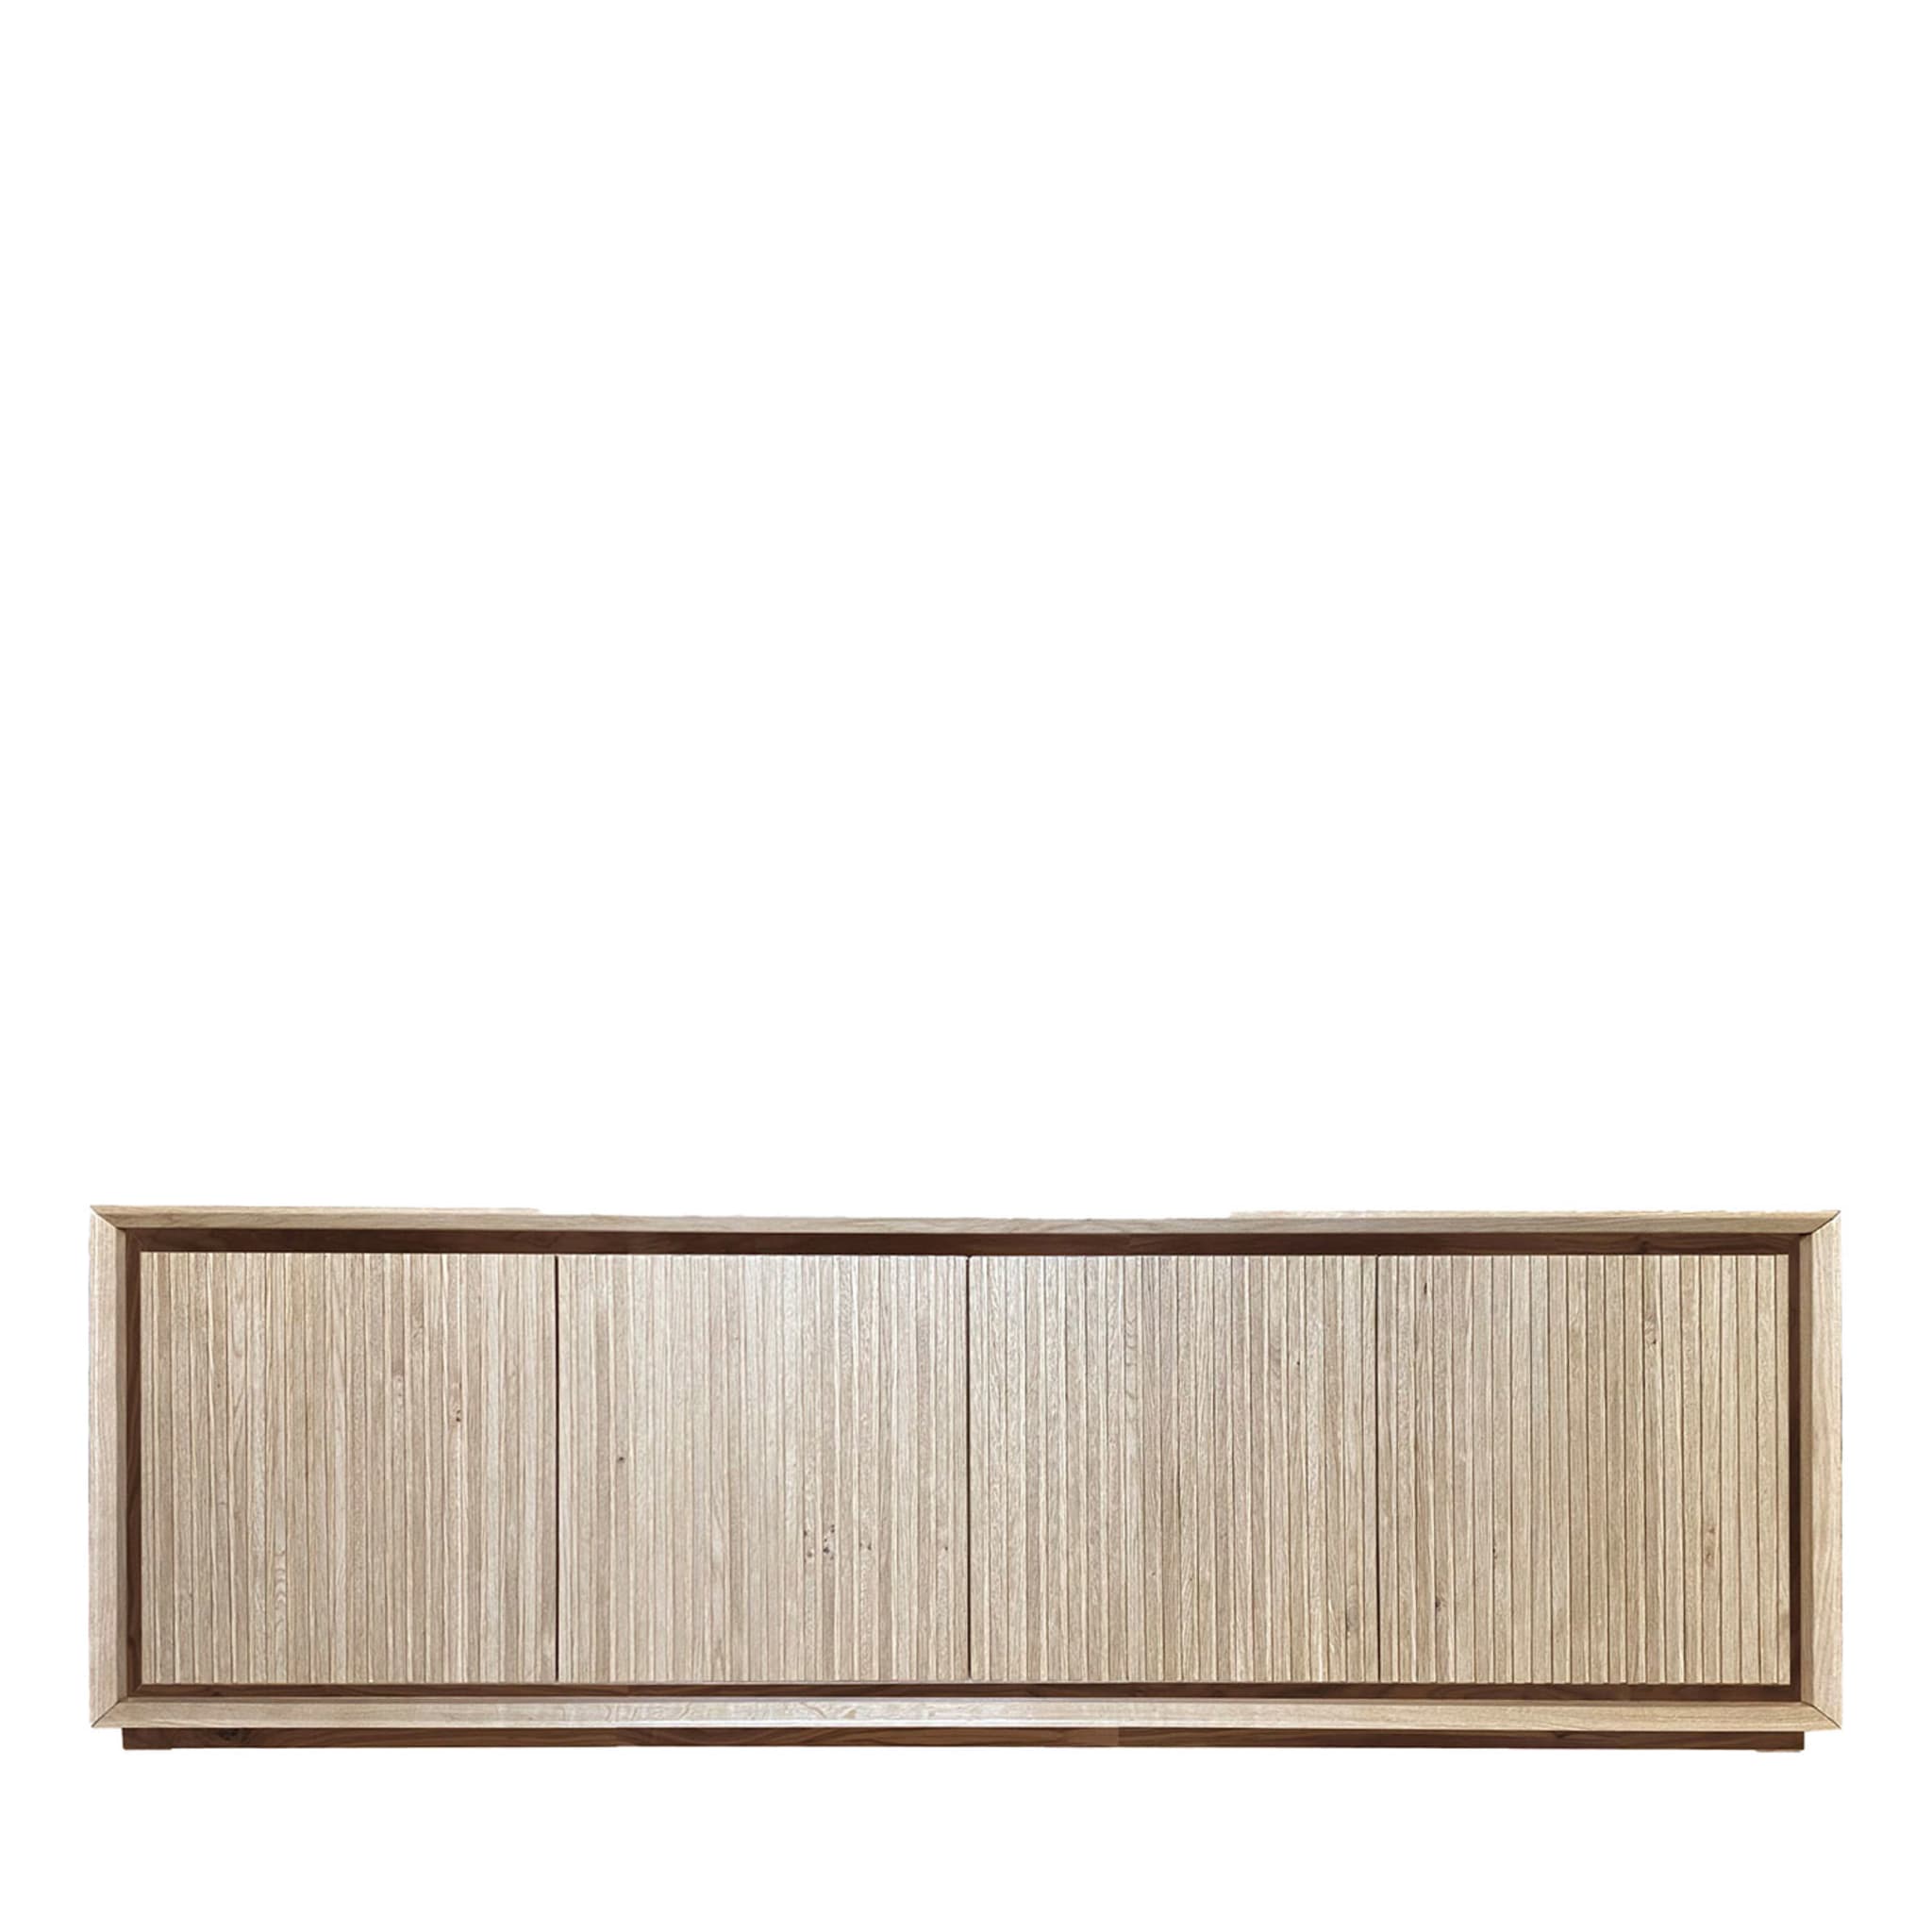 Fuga Noce Uno 4-Door Grooved Sideboard by Mascia Meccani - Main view